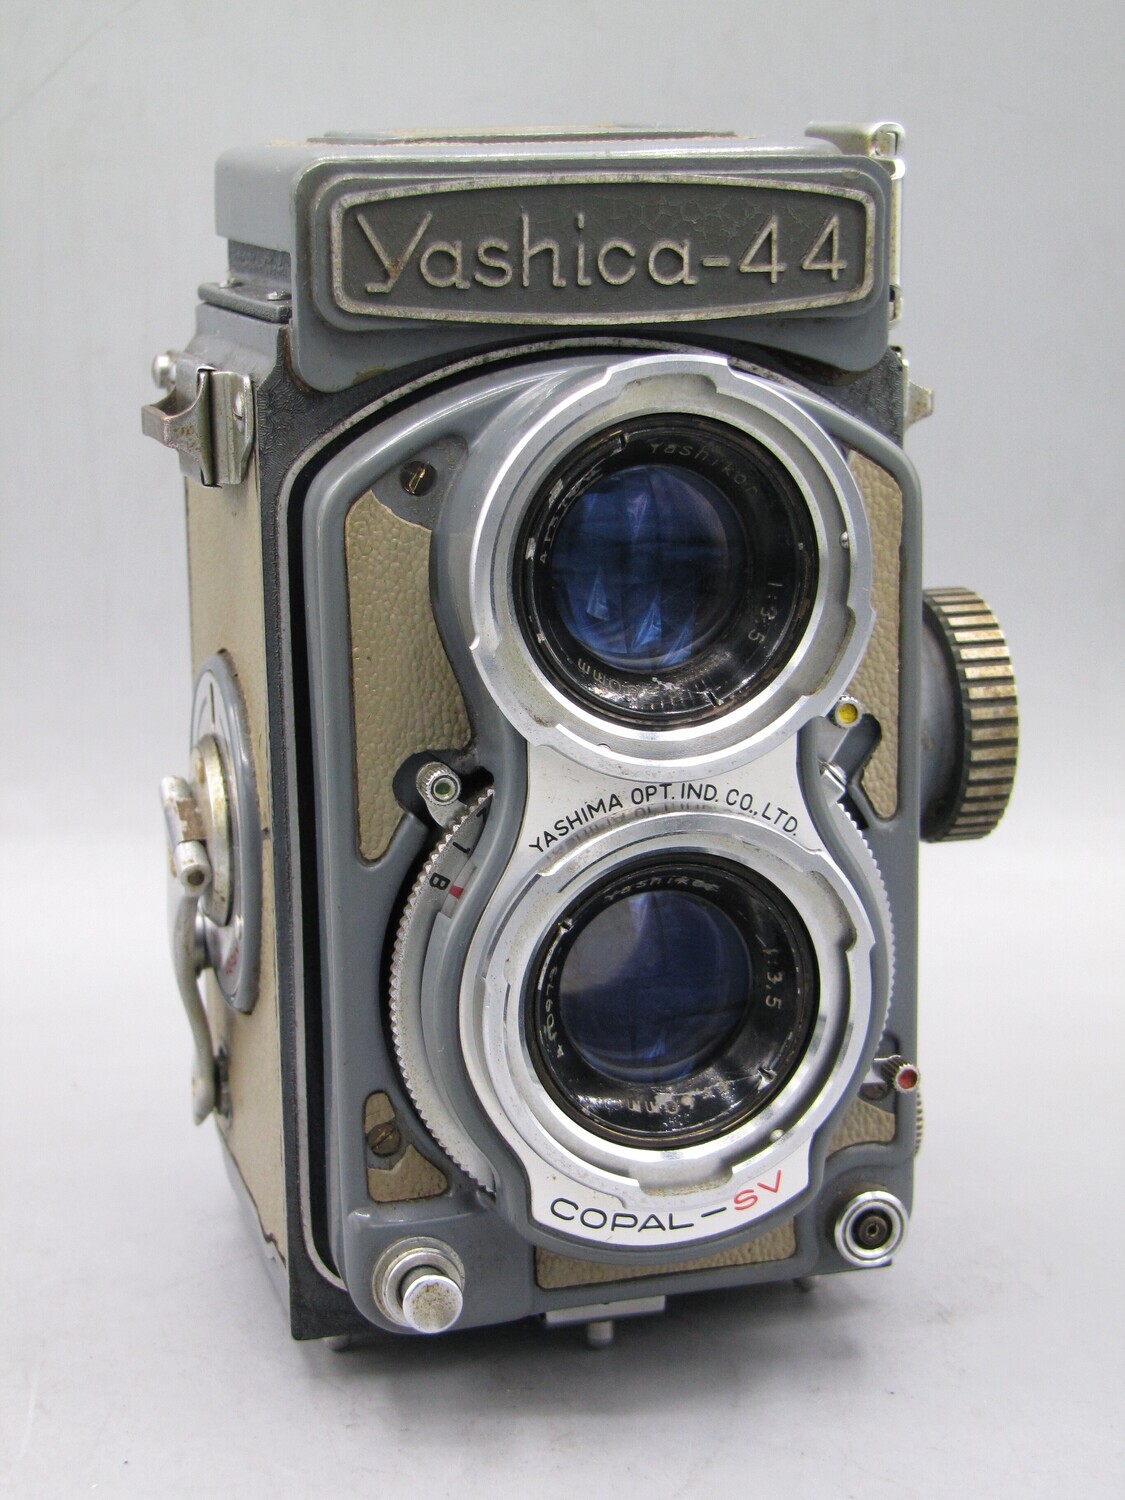 Yashica 44 TLR Film Camera Clad Seals - As Is